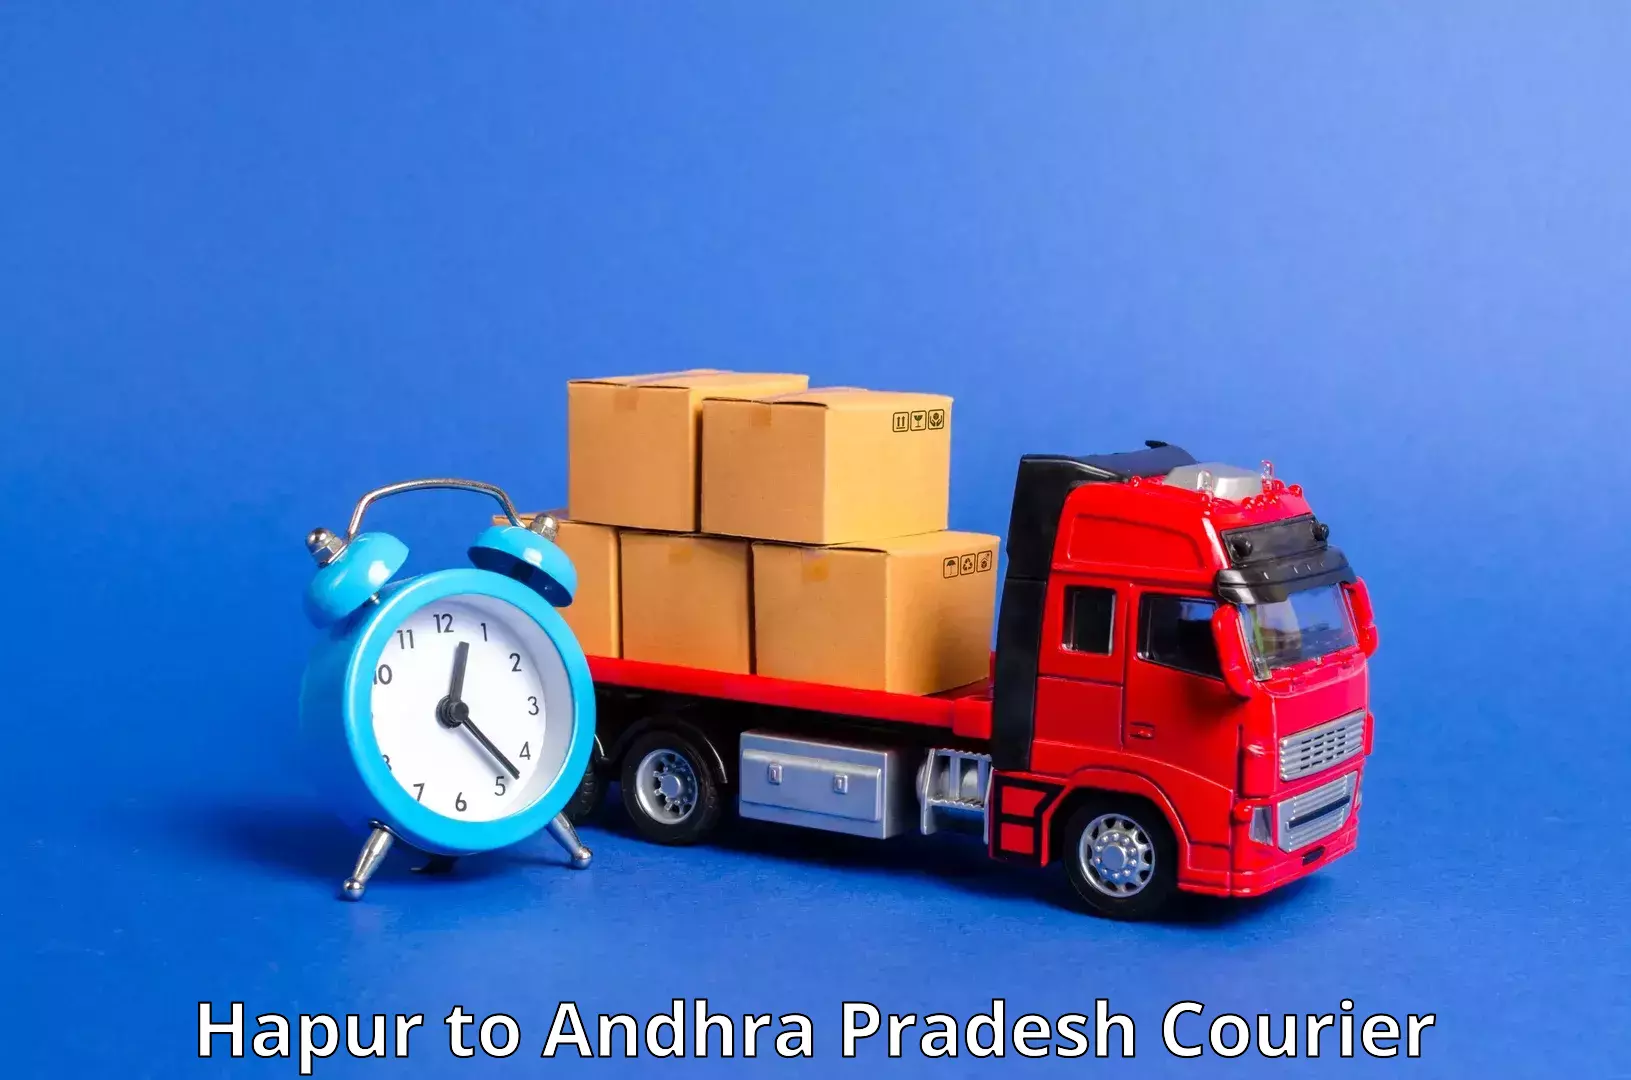 Innovative courier solutions Hapur to Visakhapatnam Port